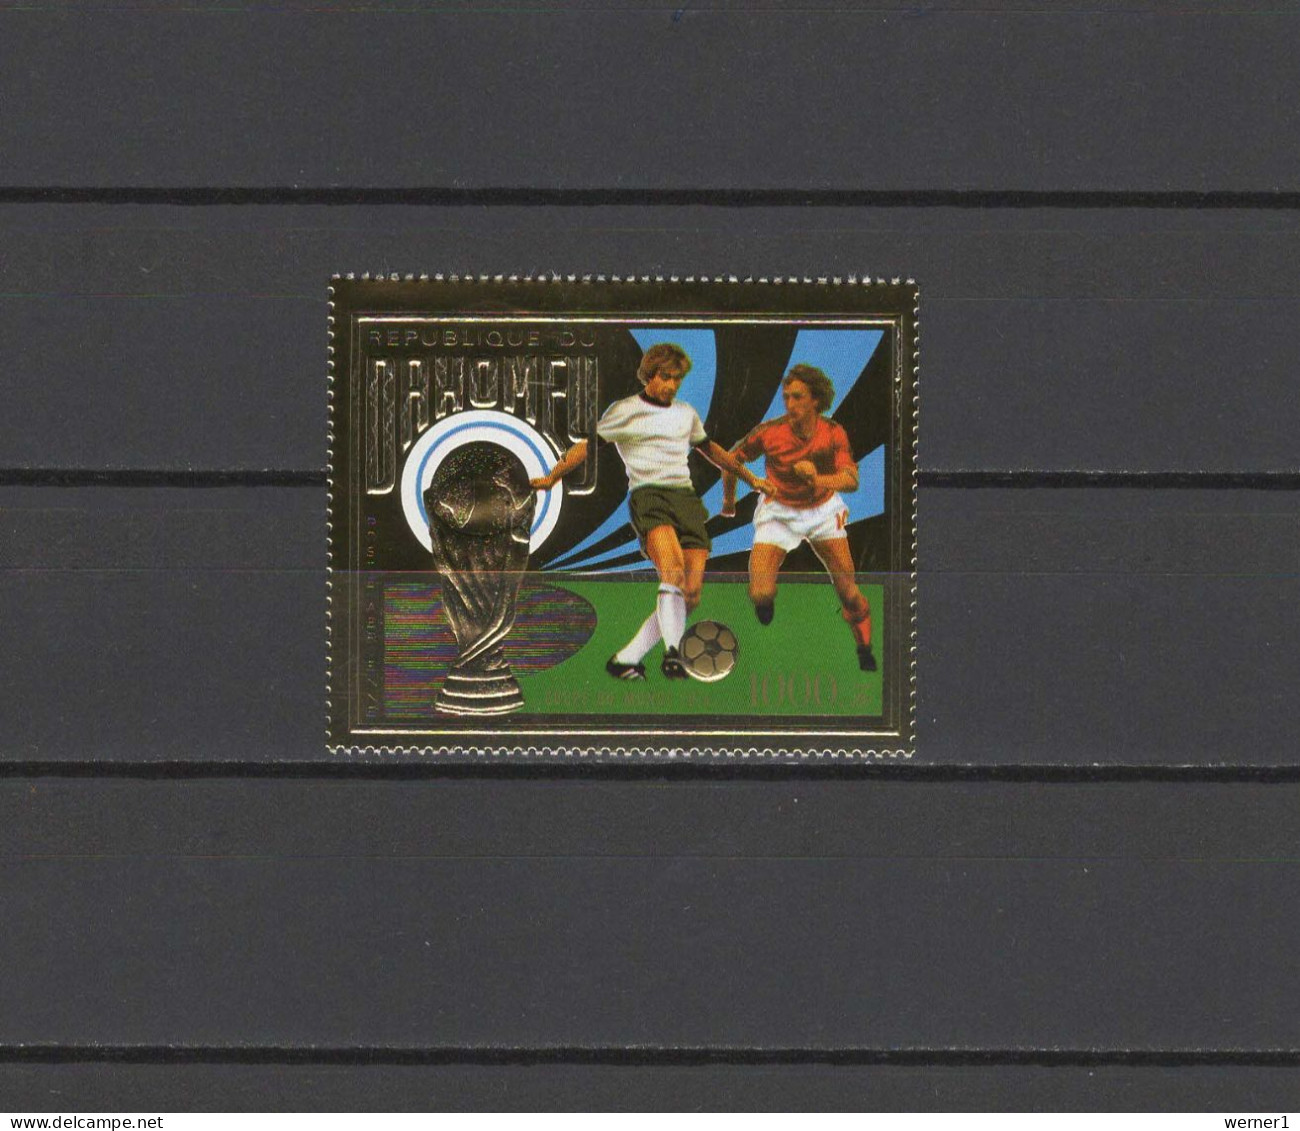 Dahomey 1974 Football Soccer World Cup Gold Stamp MNH - 1974 – Germania Ovest